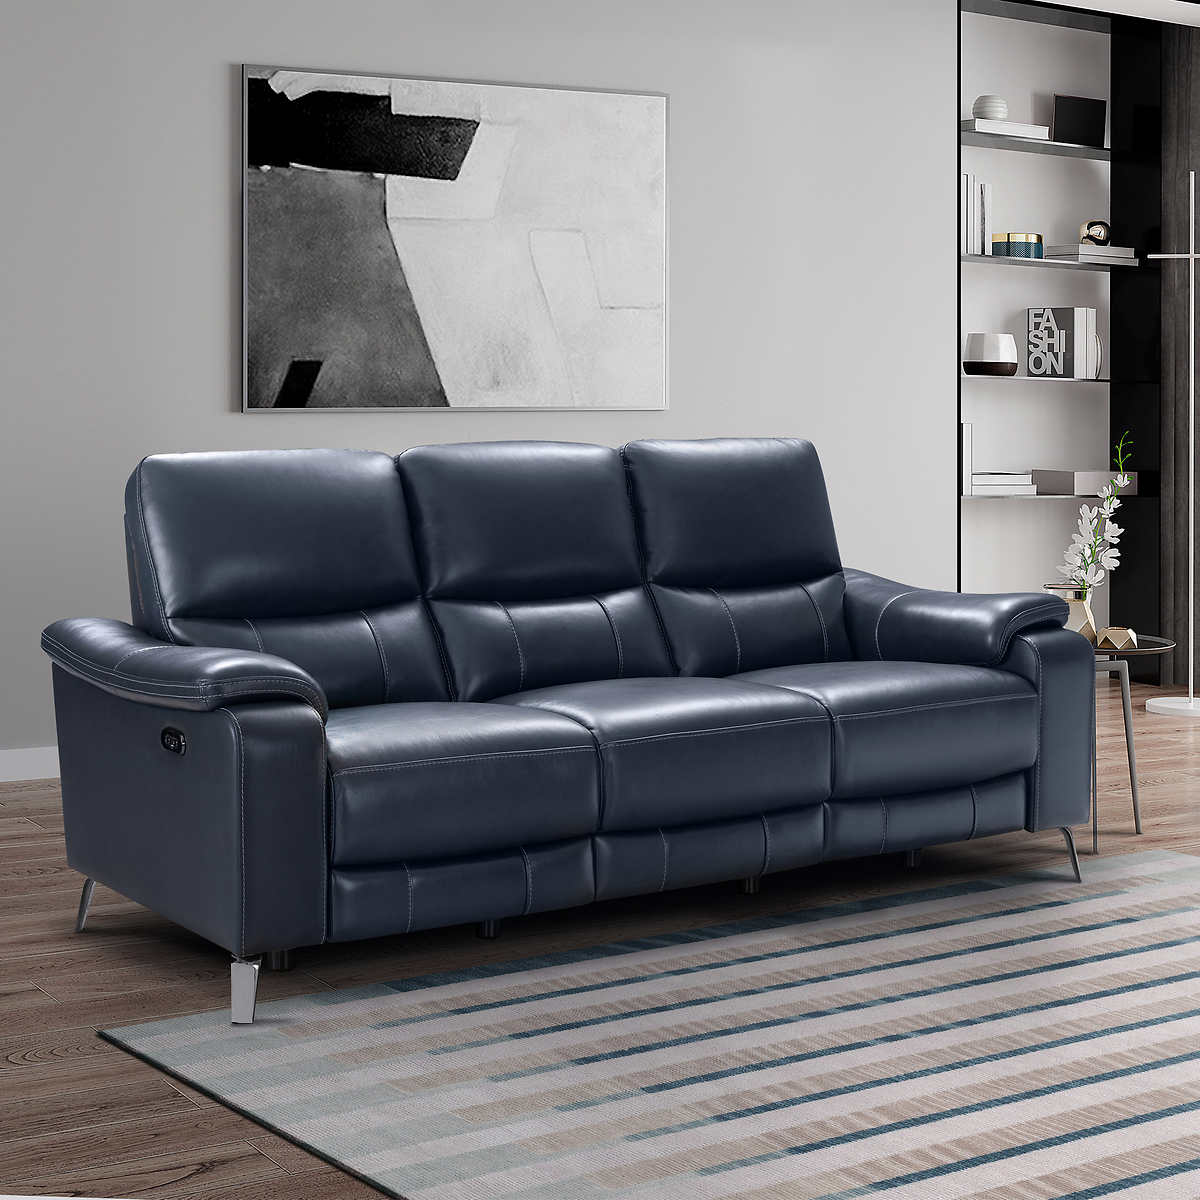 Indigo Bay Leather Power Reclining Sofa, Leather Couch With Recliners